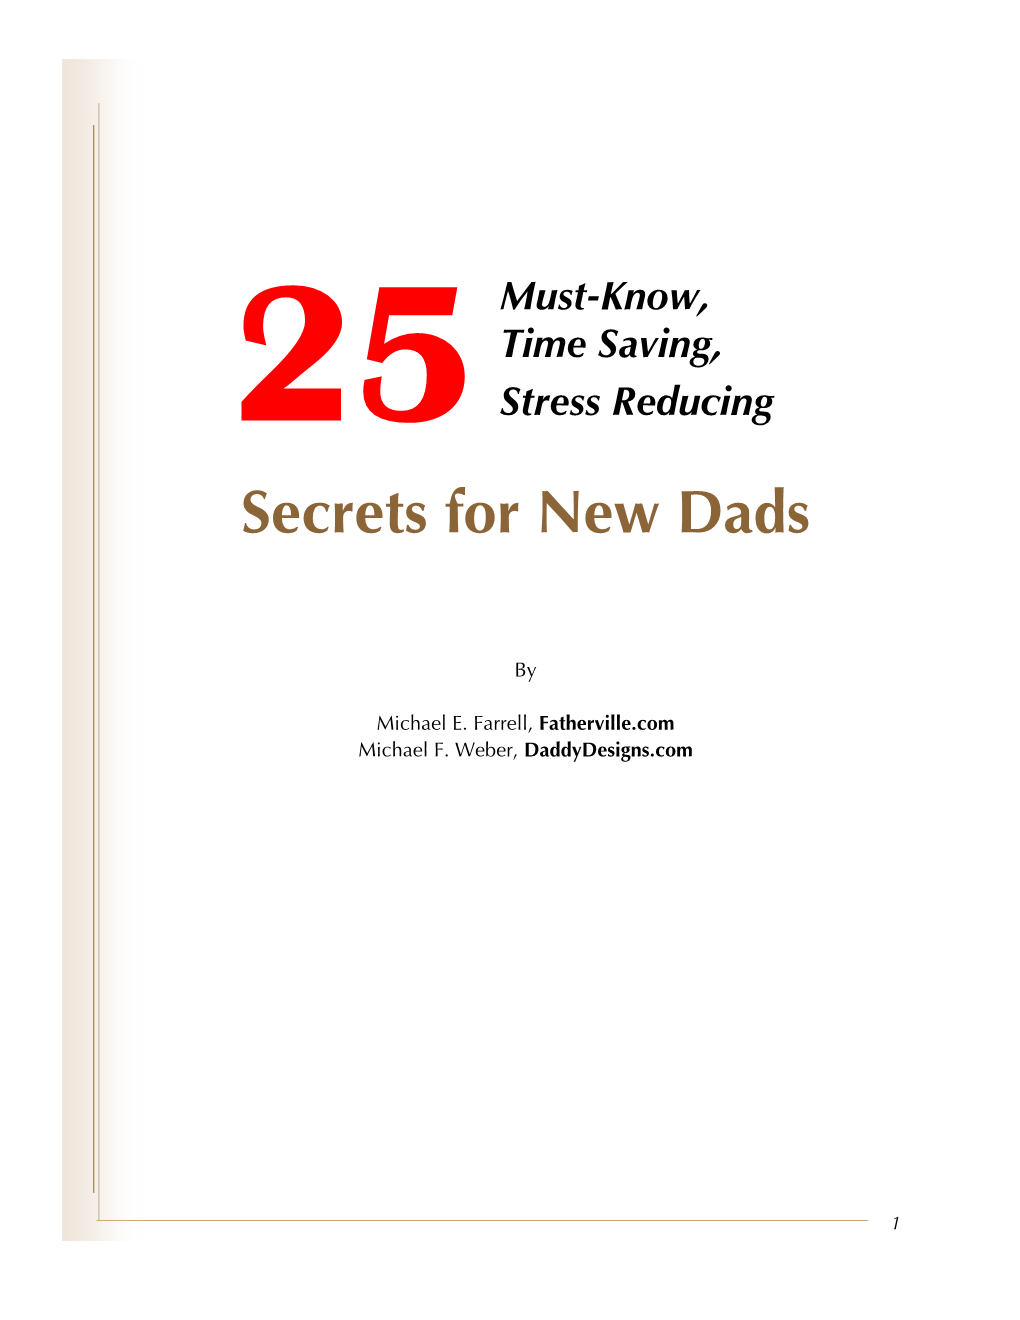 Secrets for New Dads